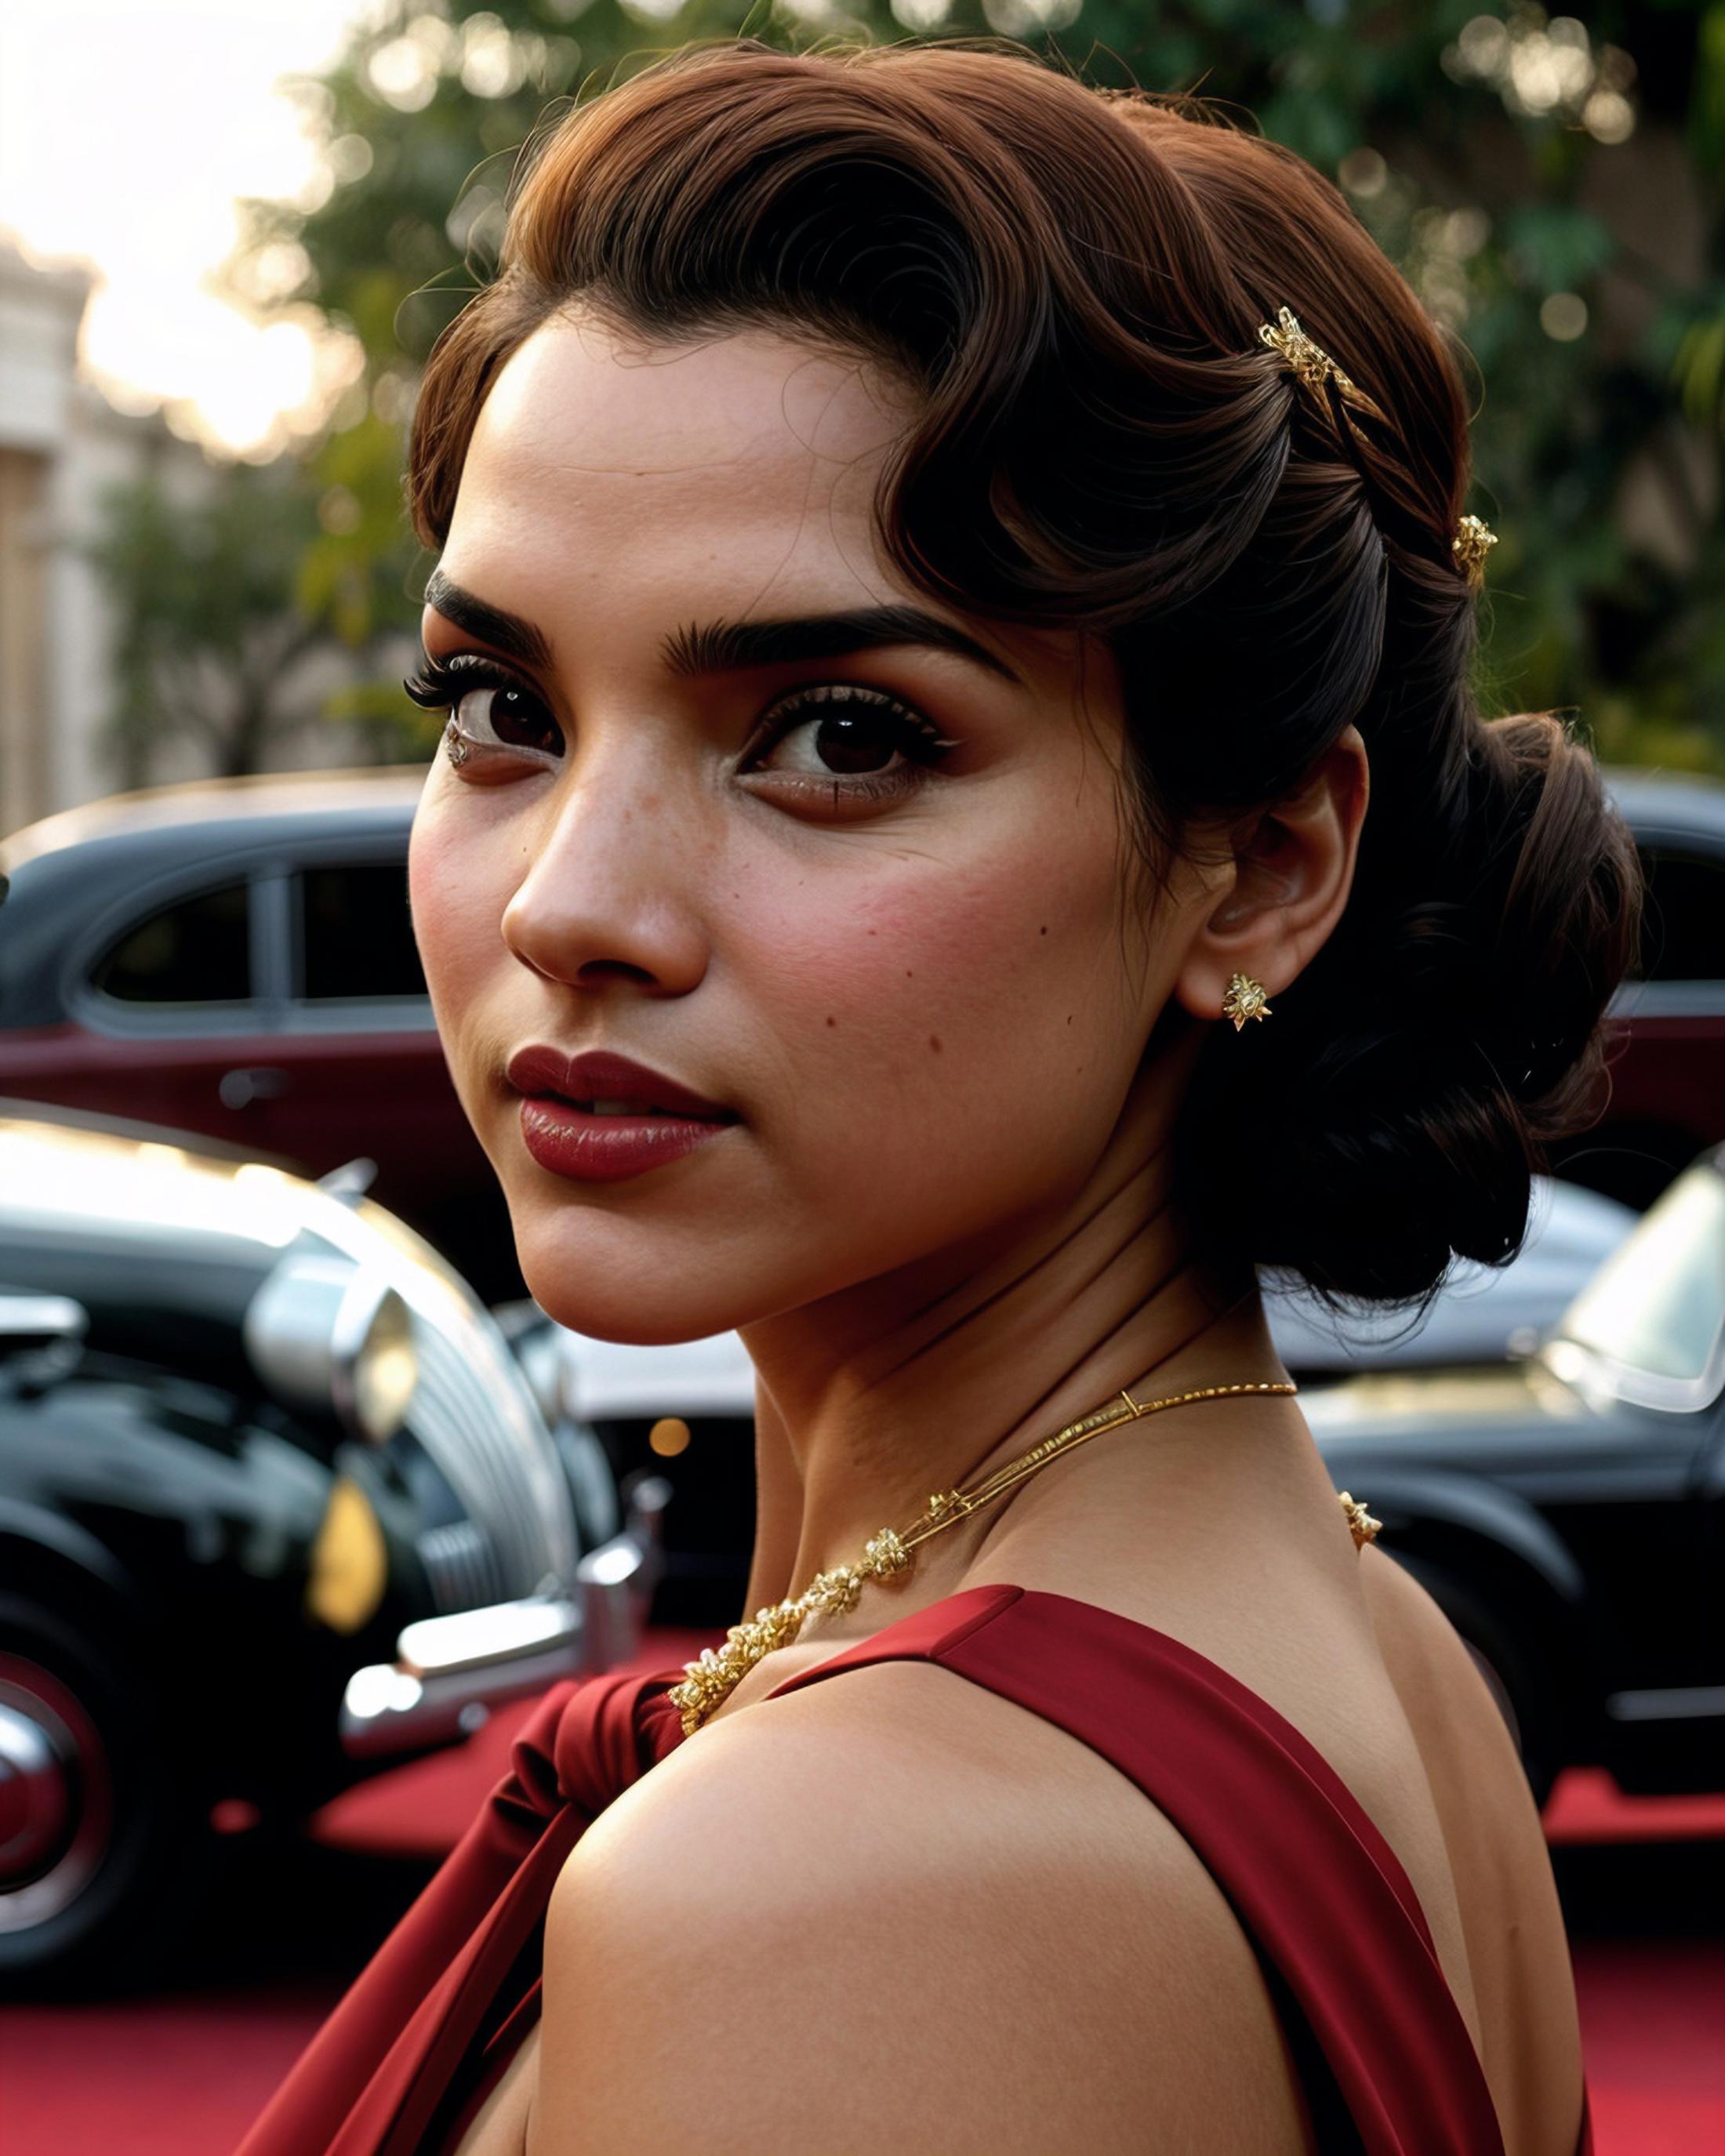 Amber Rose Revah image by chzbro